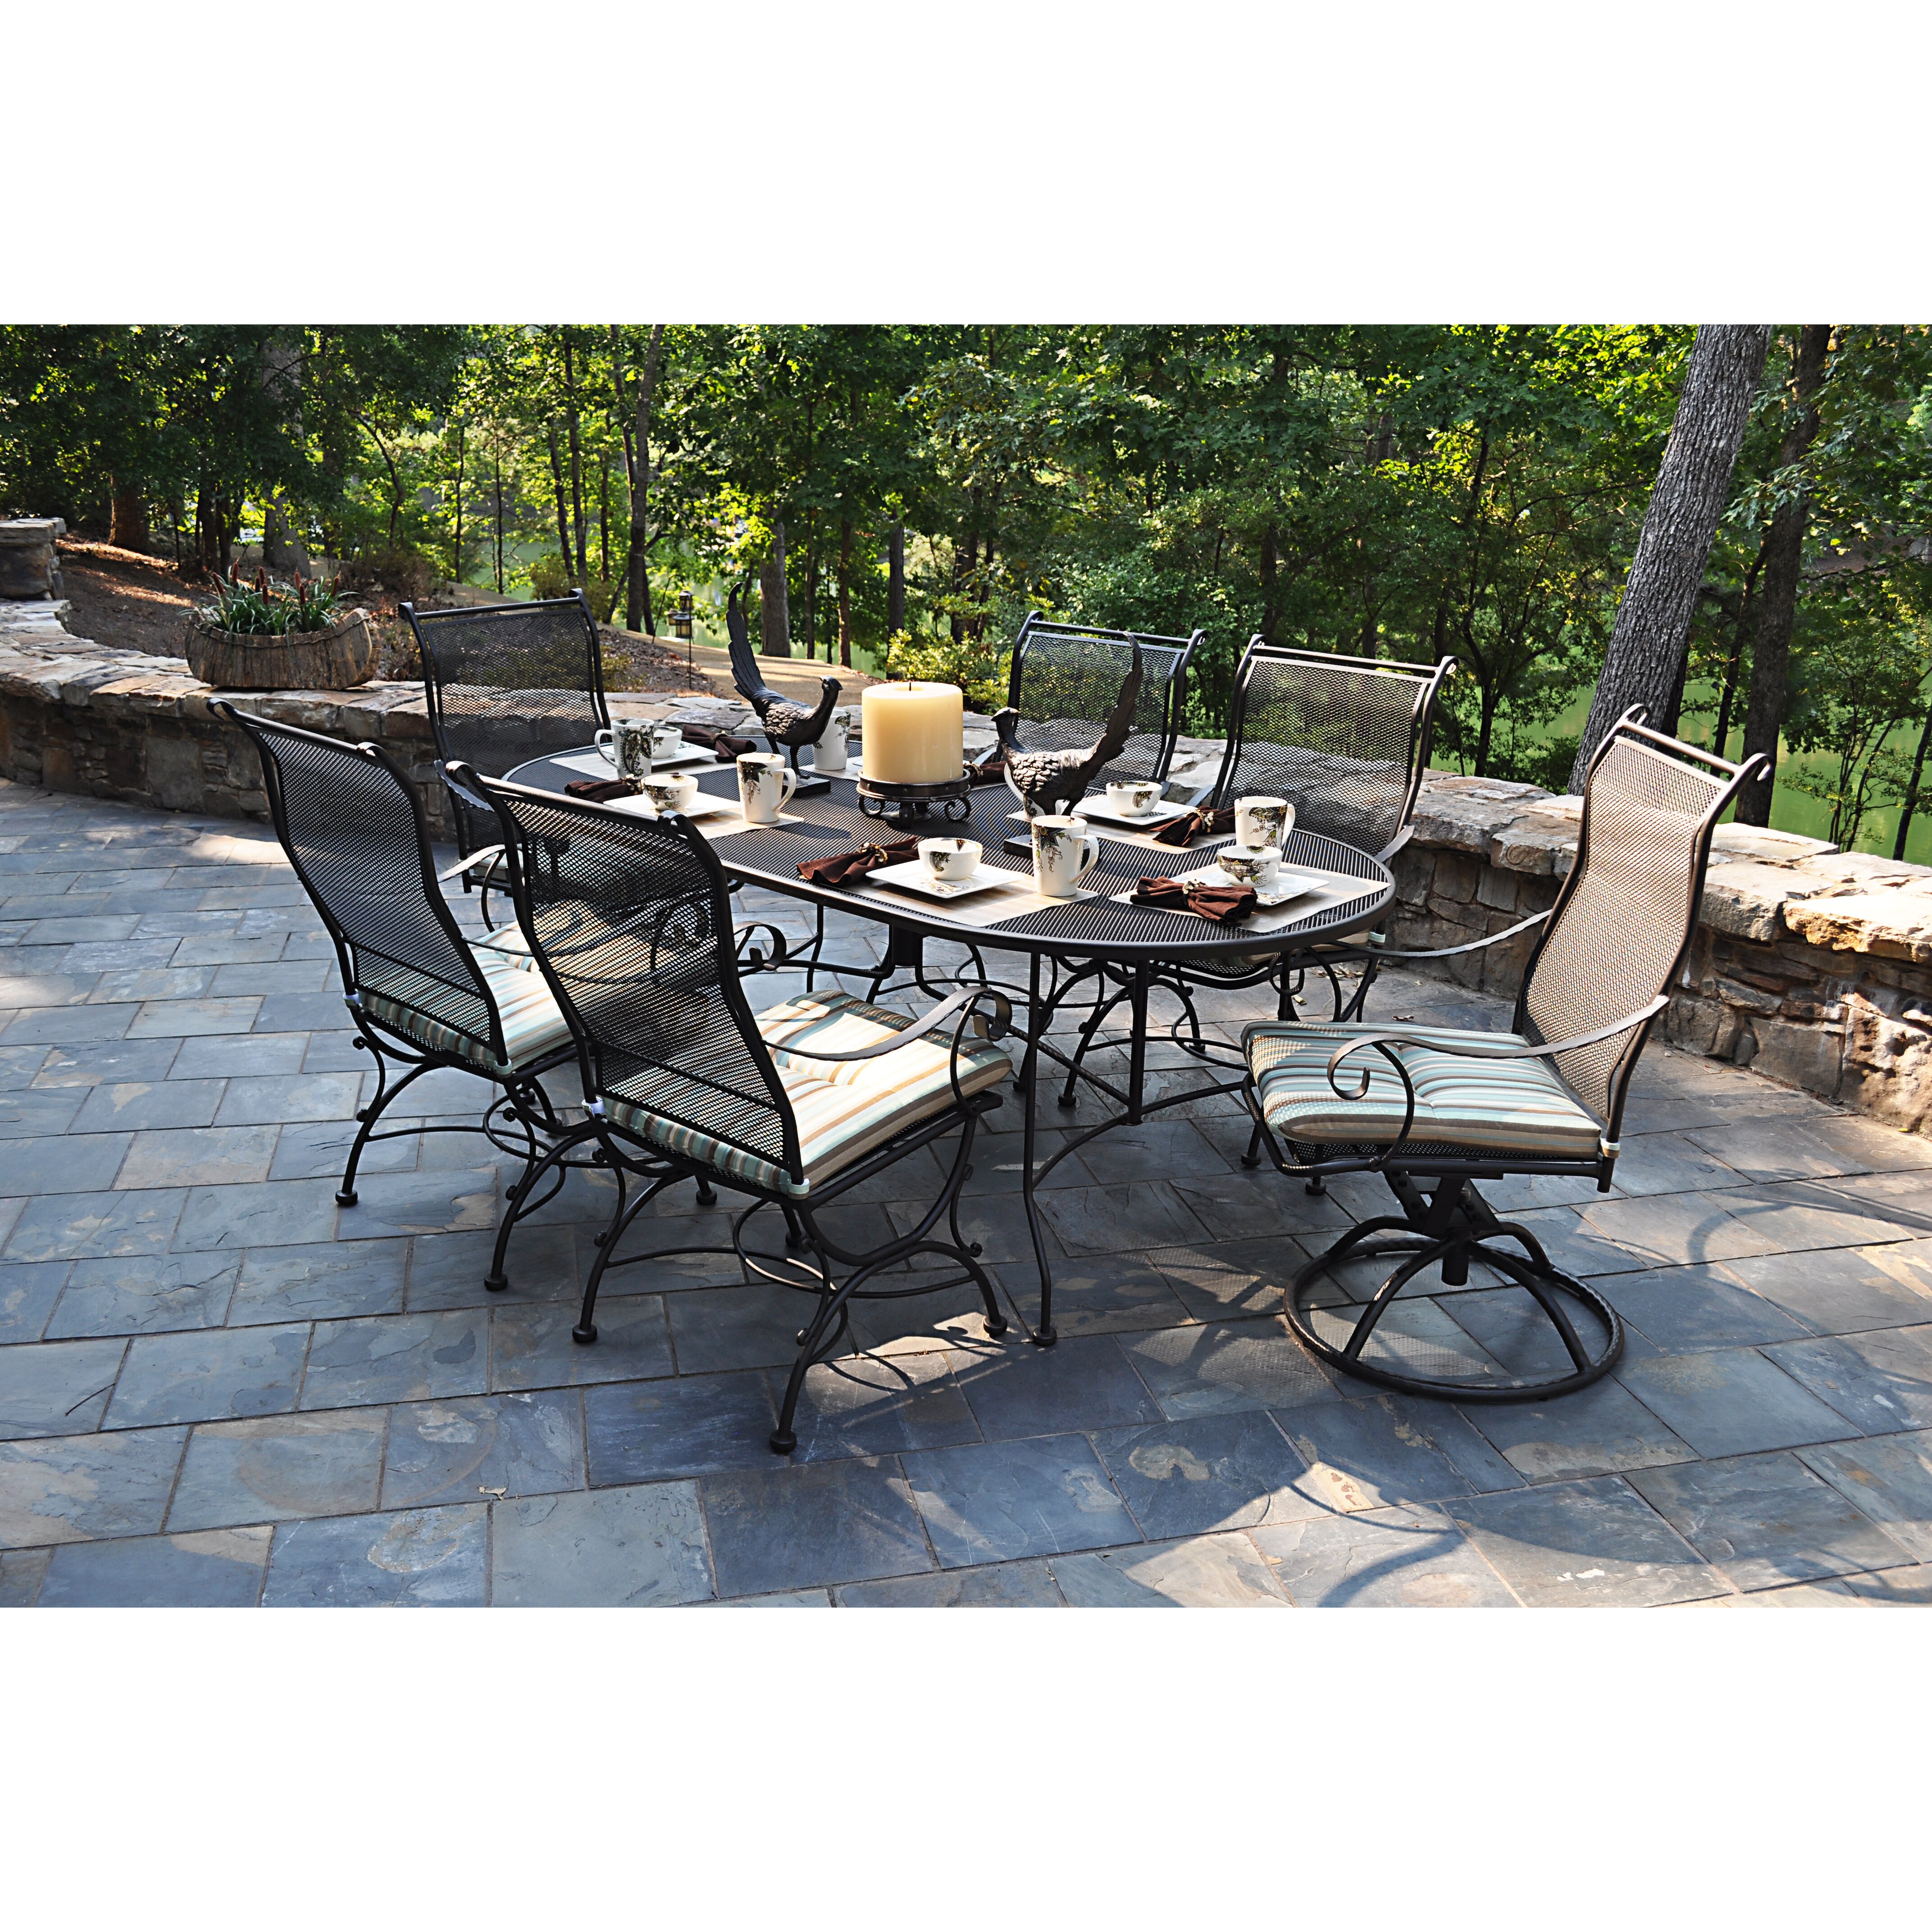 Meadowcraft Patio Furniture Athens Deep Seating By Meadowcraft